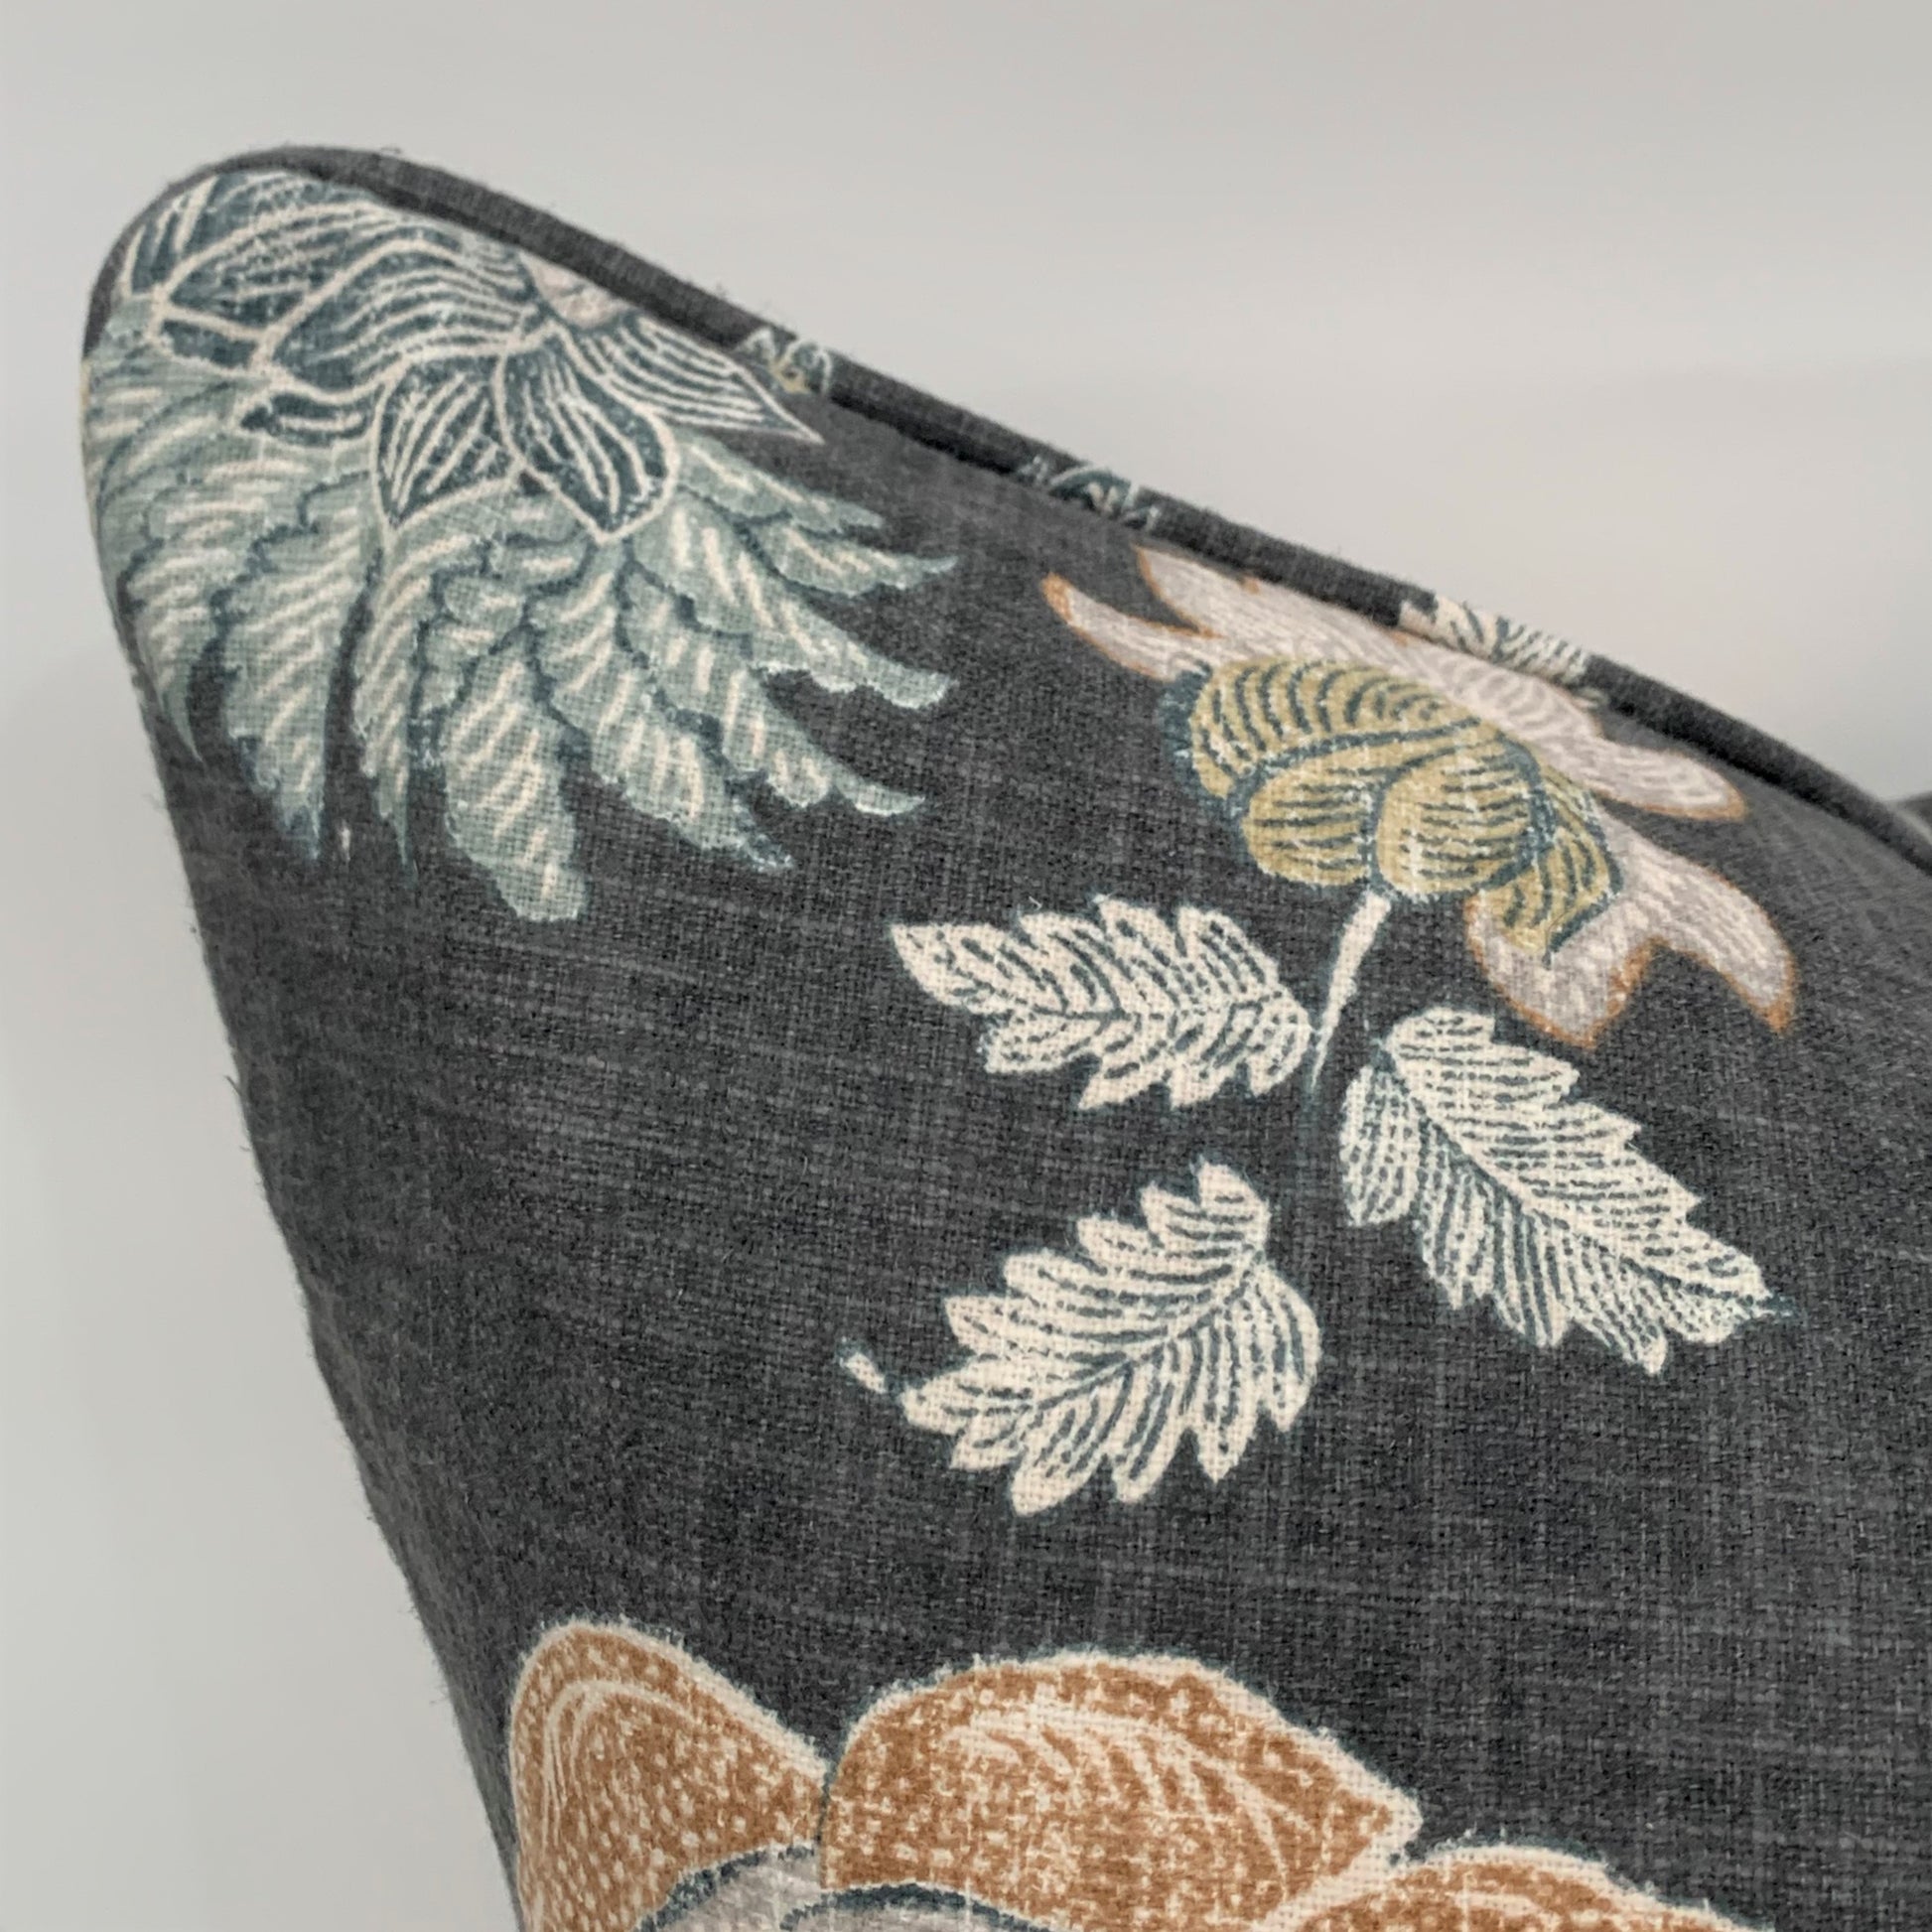 This beautiful Graphite Floral Linen Cushion from Richloom Fabrics is exquisitely crafted from a sumptuous heavyweight fabric. With a soft floral pattern and subtle hues against a dark grey backdrop, it adds a timelessly graceful and elegant touch to any home decor. Includes a luxurious feather insert. Close up corner.